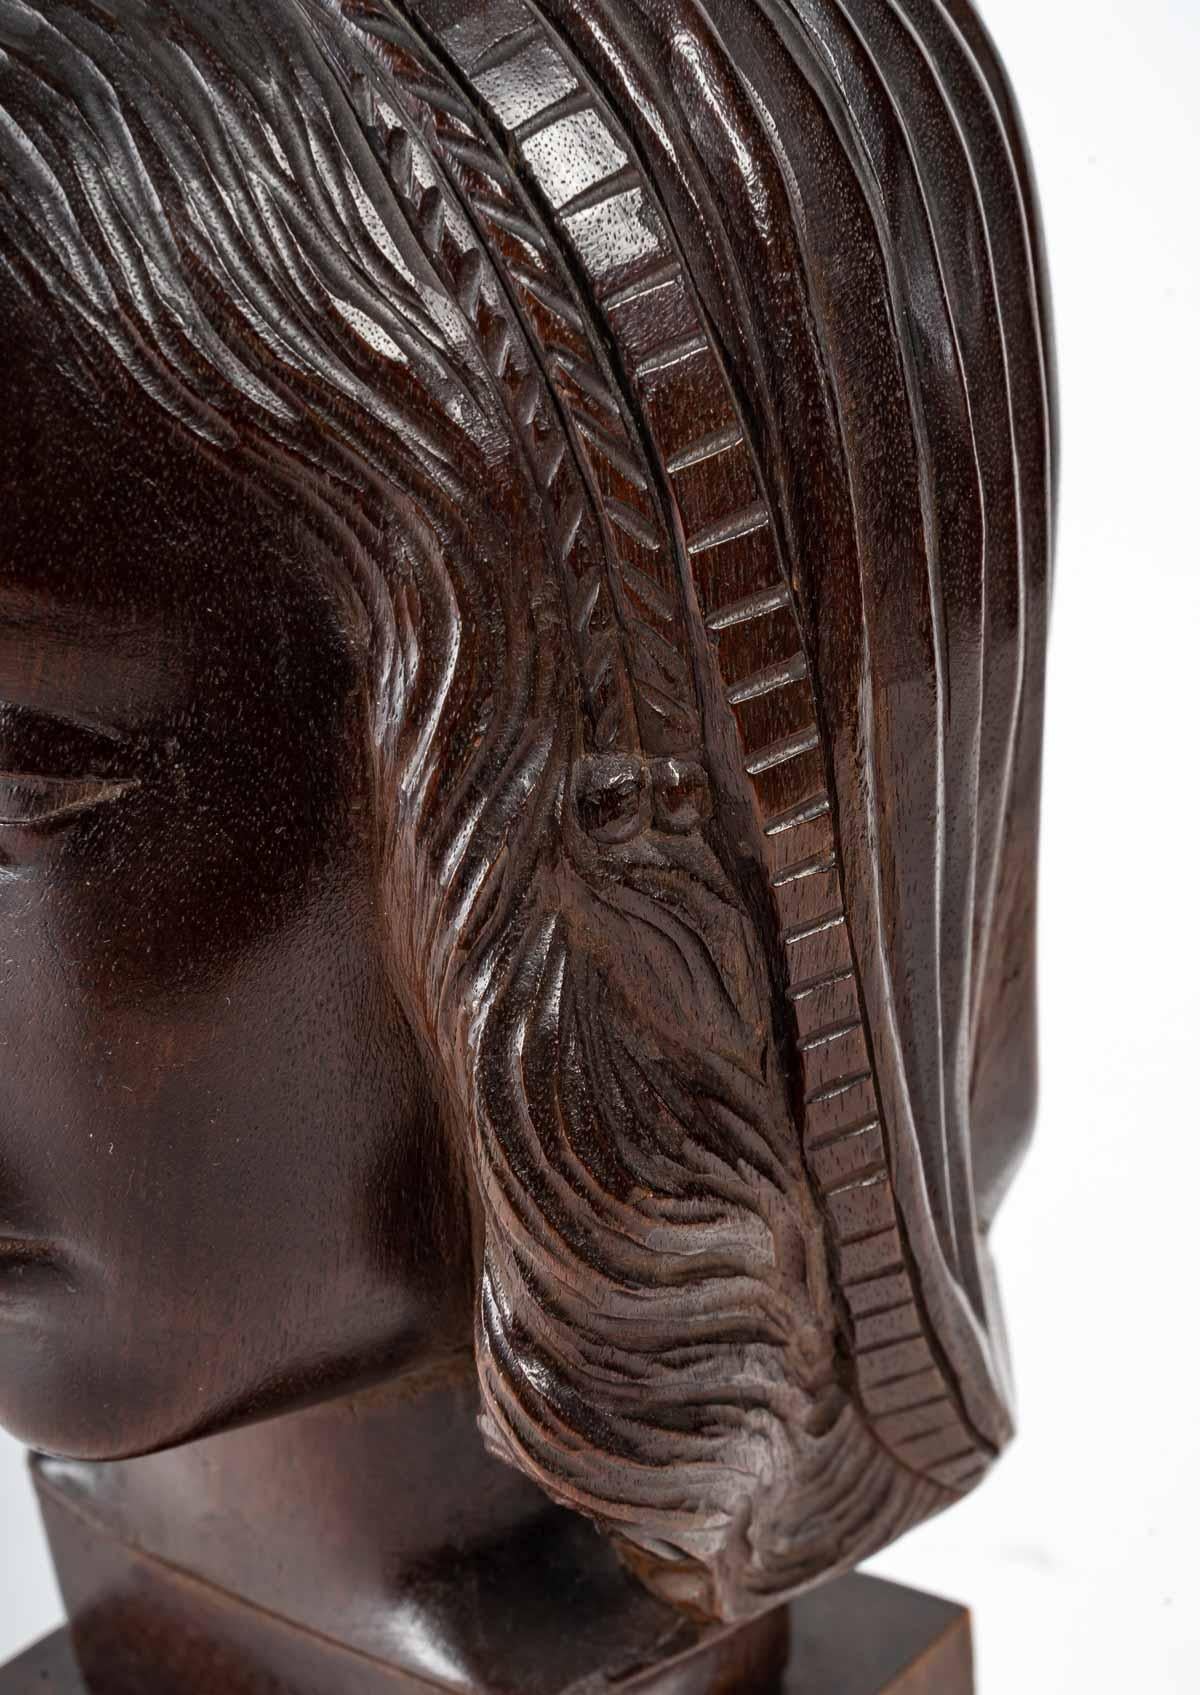 Head of a woman, wood sculpture, Art Deco, 1930
Carved wood sculpture, in the taste of the renaissance, beautiful quality of work, 1930, Art Deco style.
H: 36 cm, W: 18 cm, D: 17 cm.
 